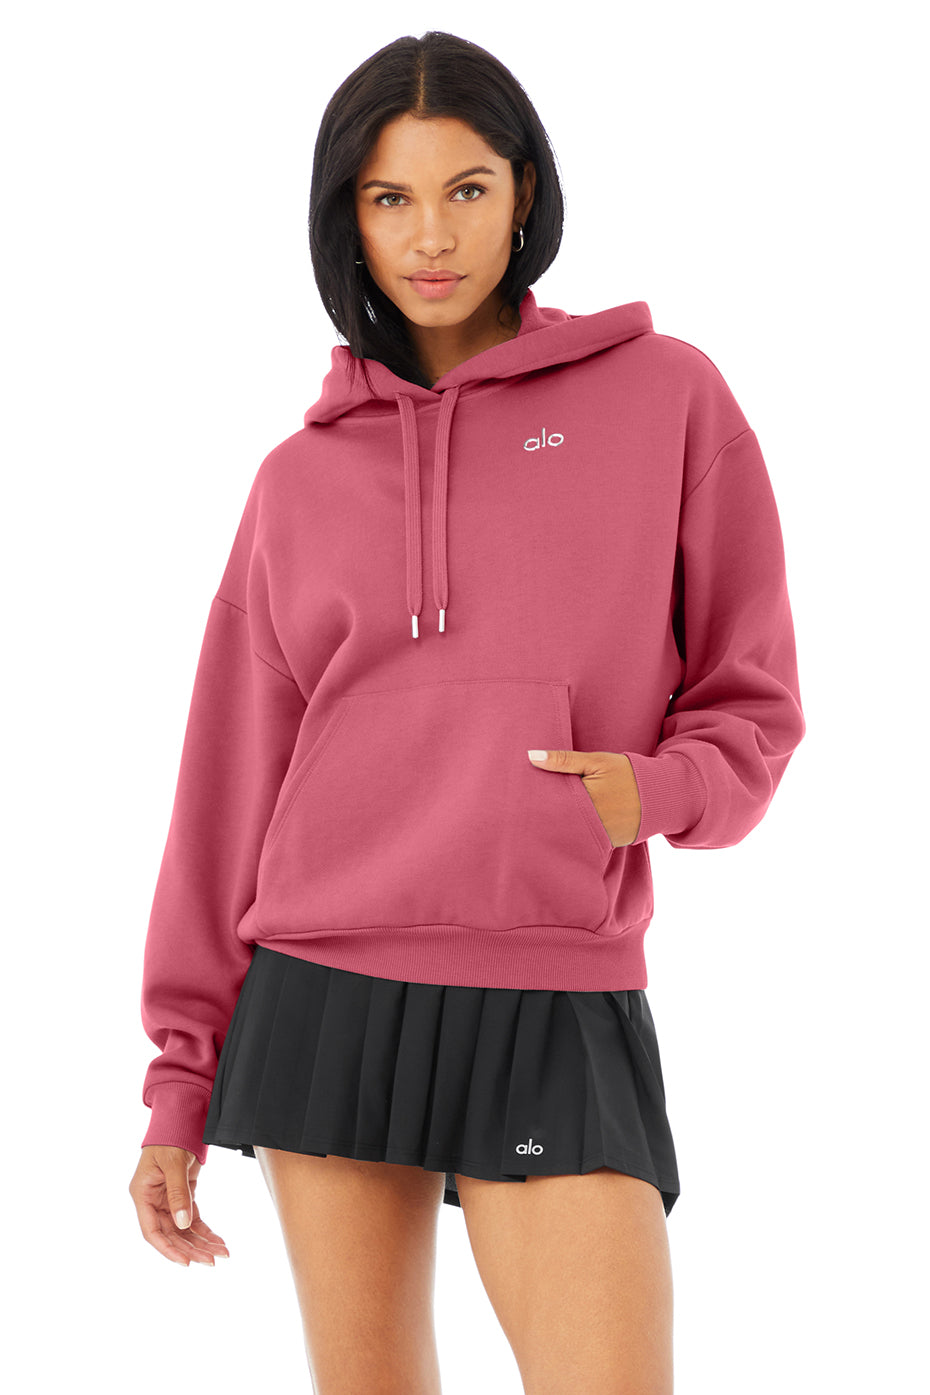 Accolade Hoodie in Raspberry Sorbet by Alo Yoga - Work Well Daily